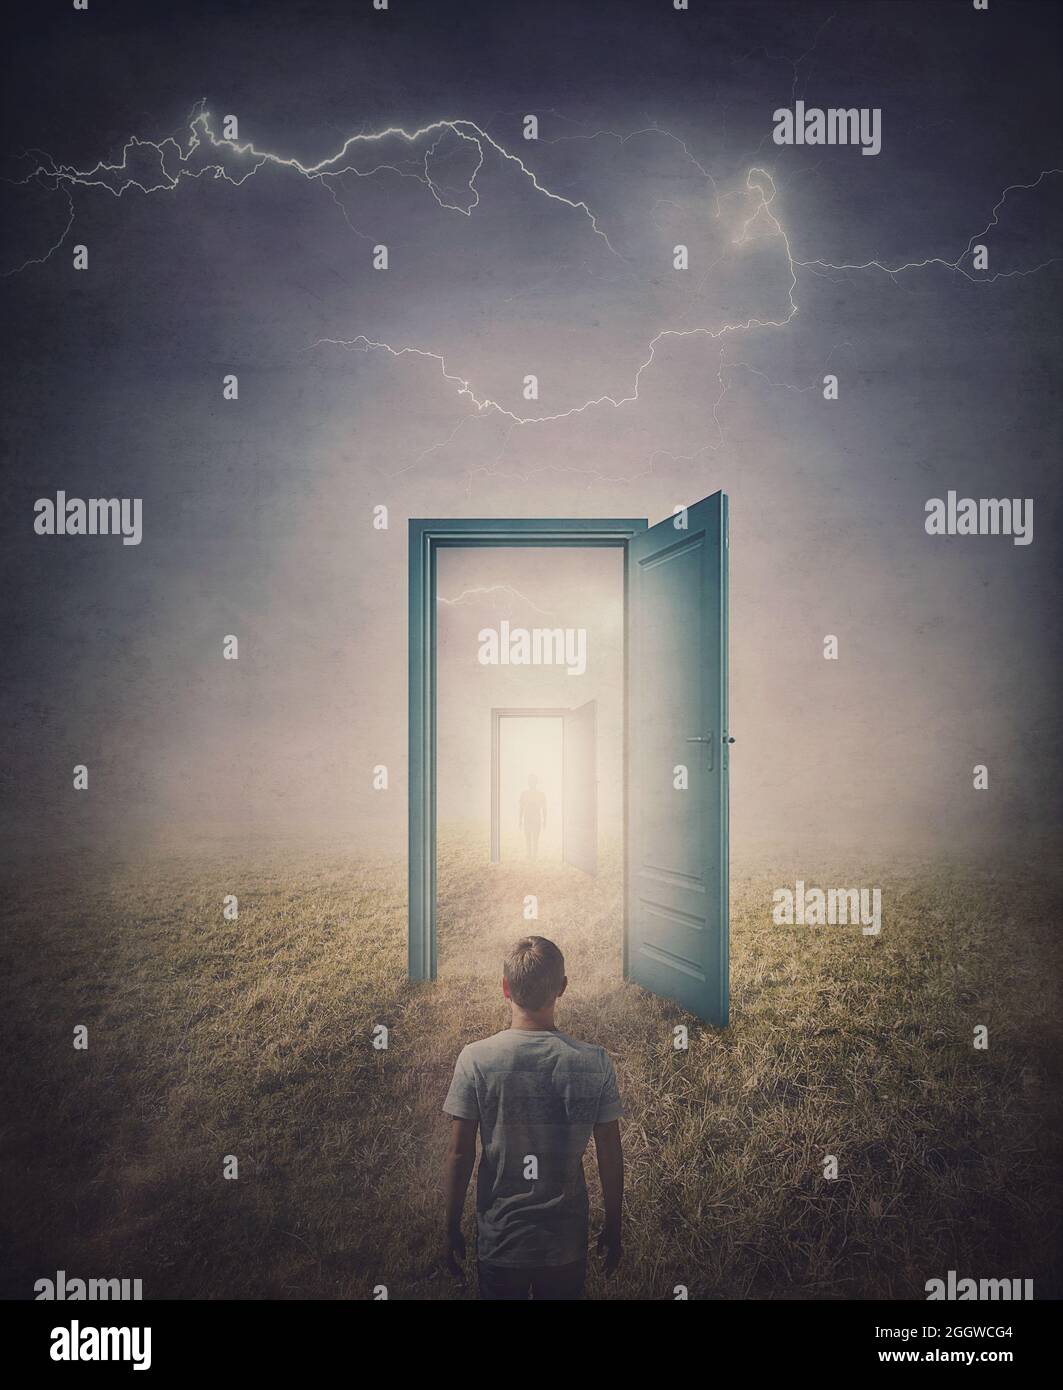 Teleportation doors concept. Rear view of a person standing in front of a doorway in the land, as seen in the mirror like a portal to another world. M Stock Photo